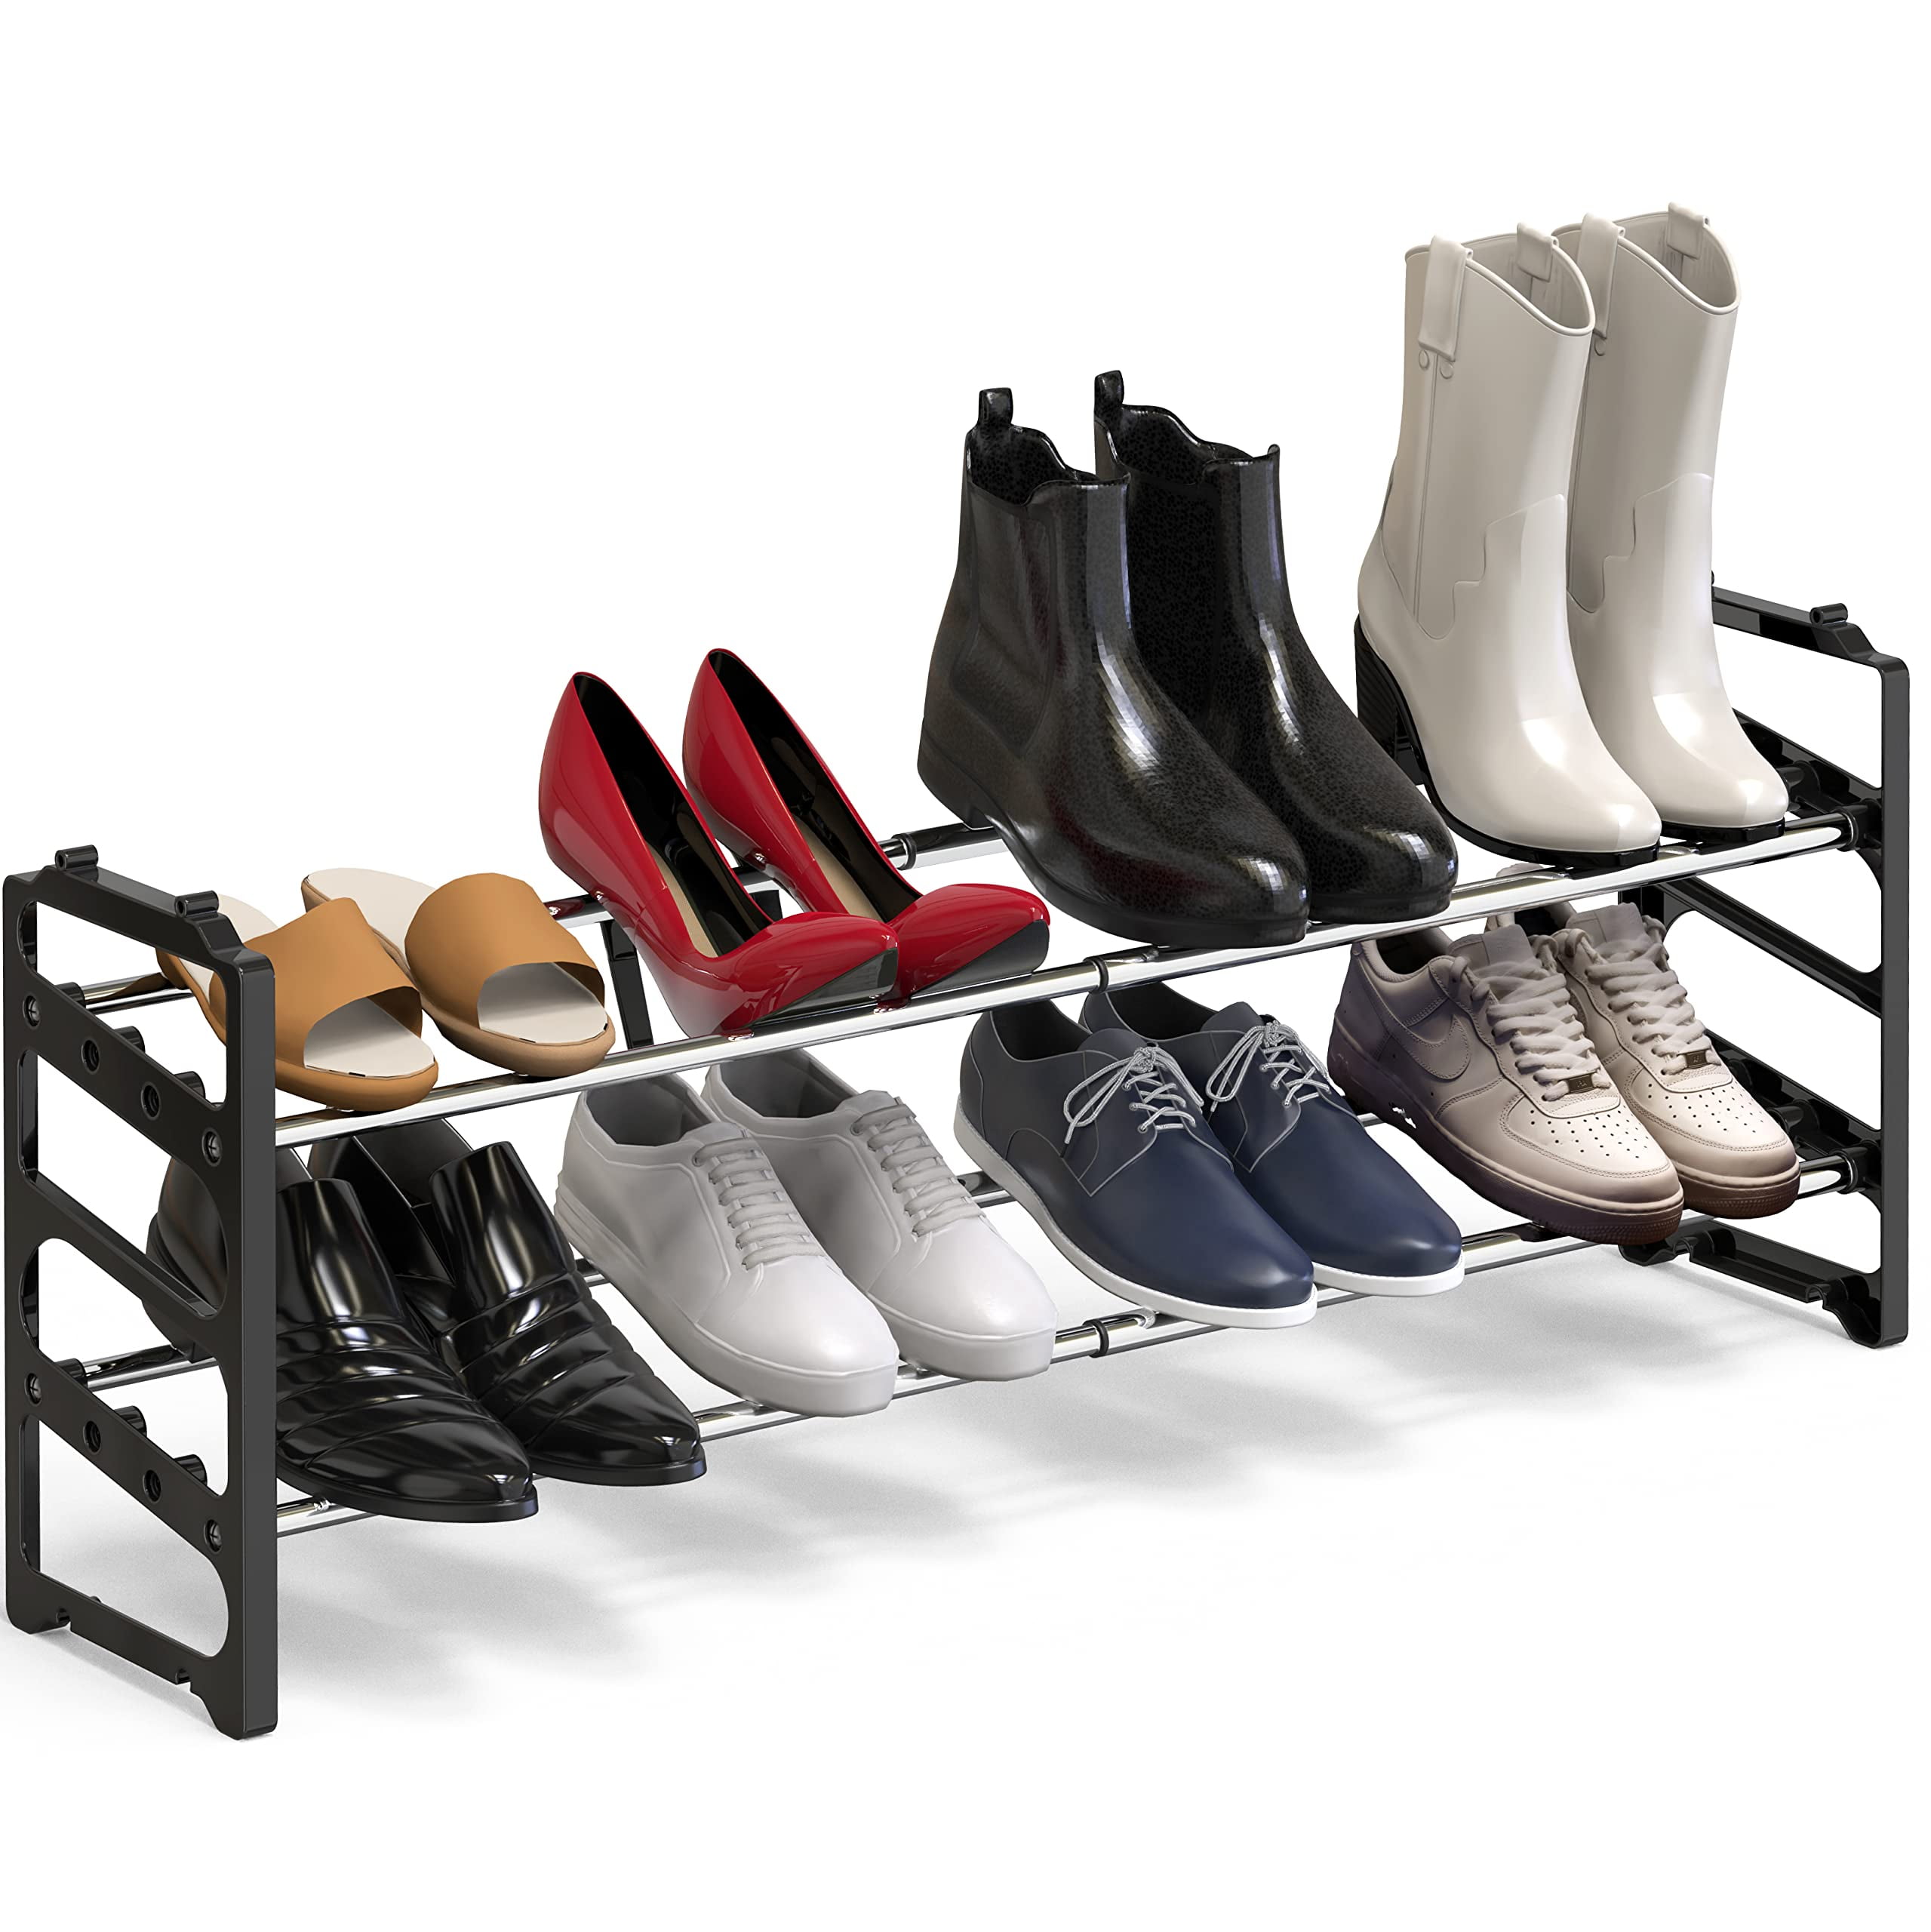 SimpleHouseware 2-Tier Extendable Shoe Rack stored up to 8 shoes, Black